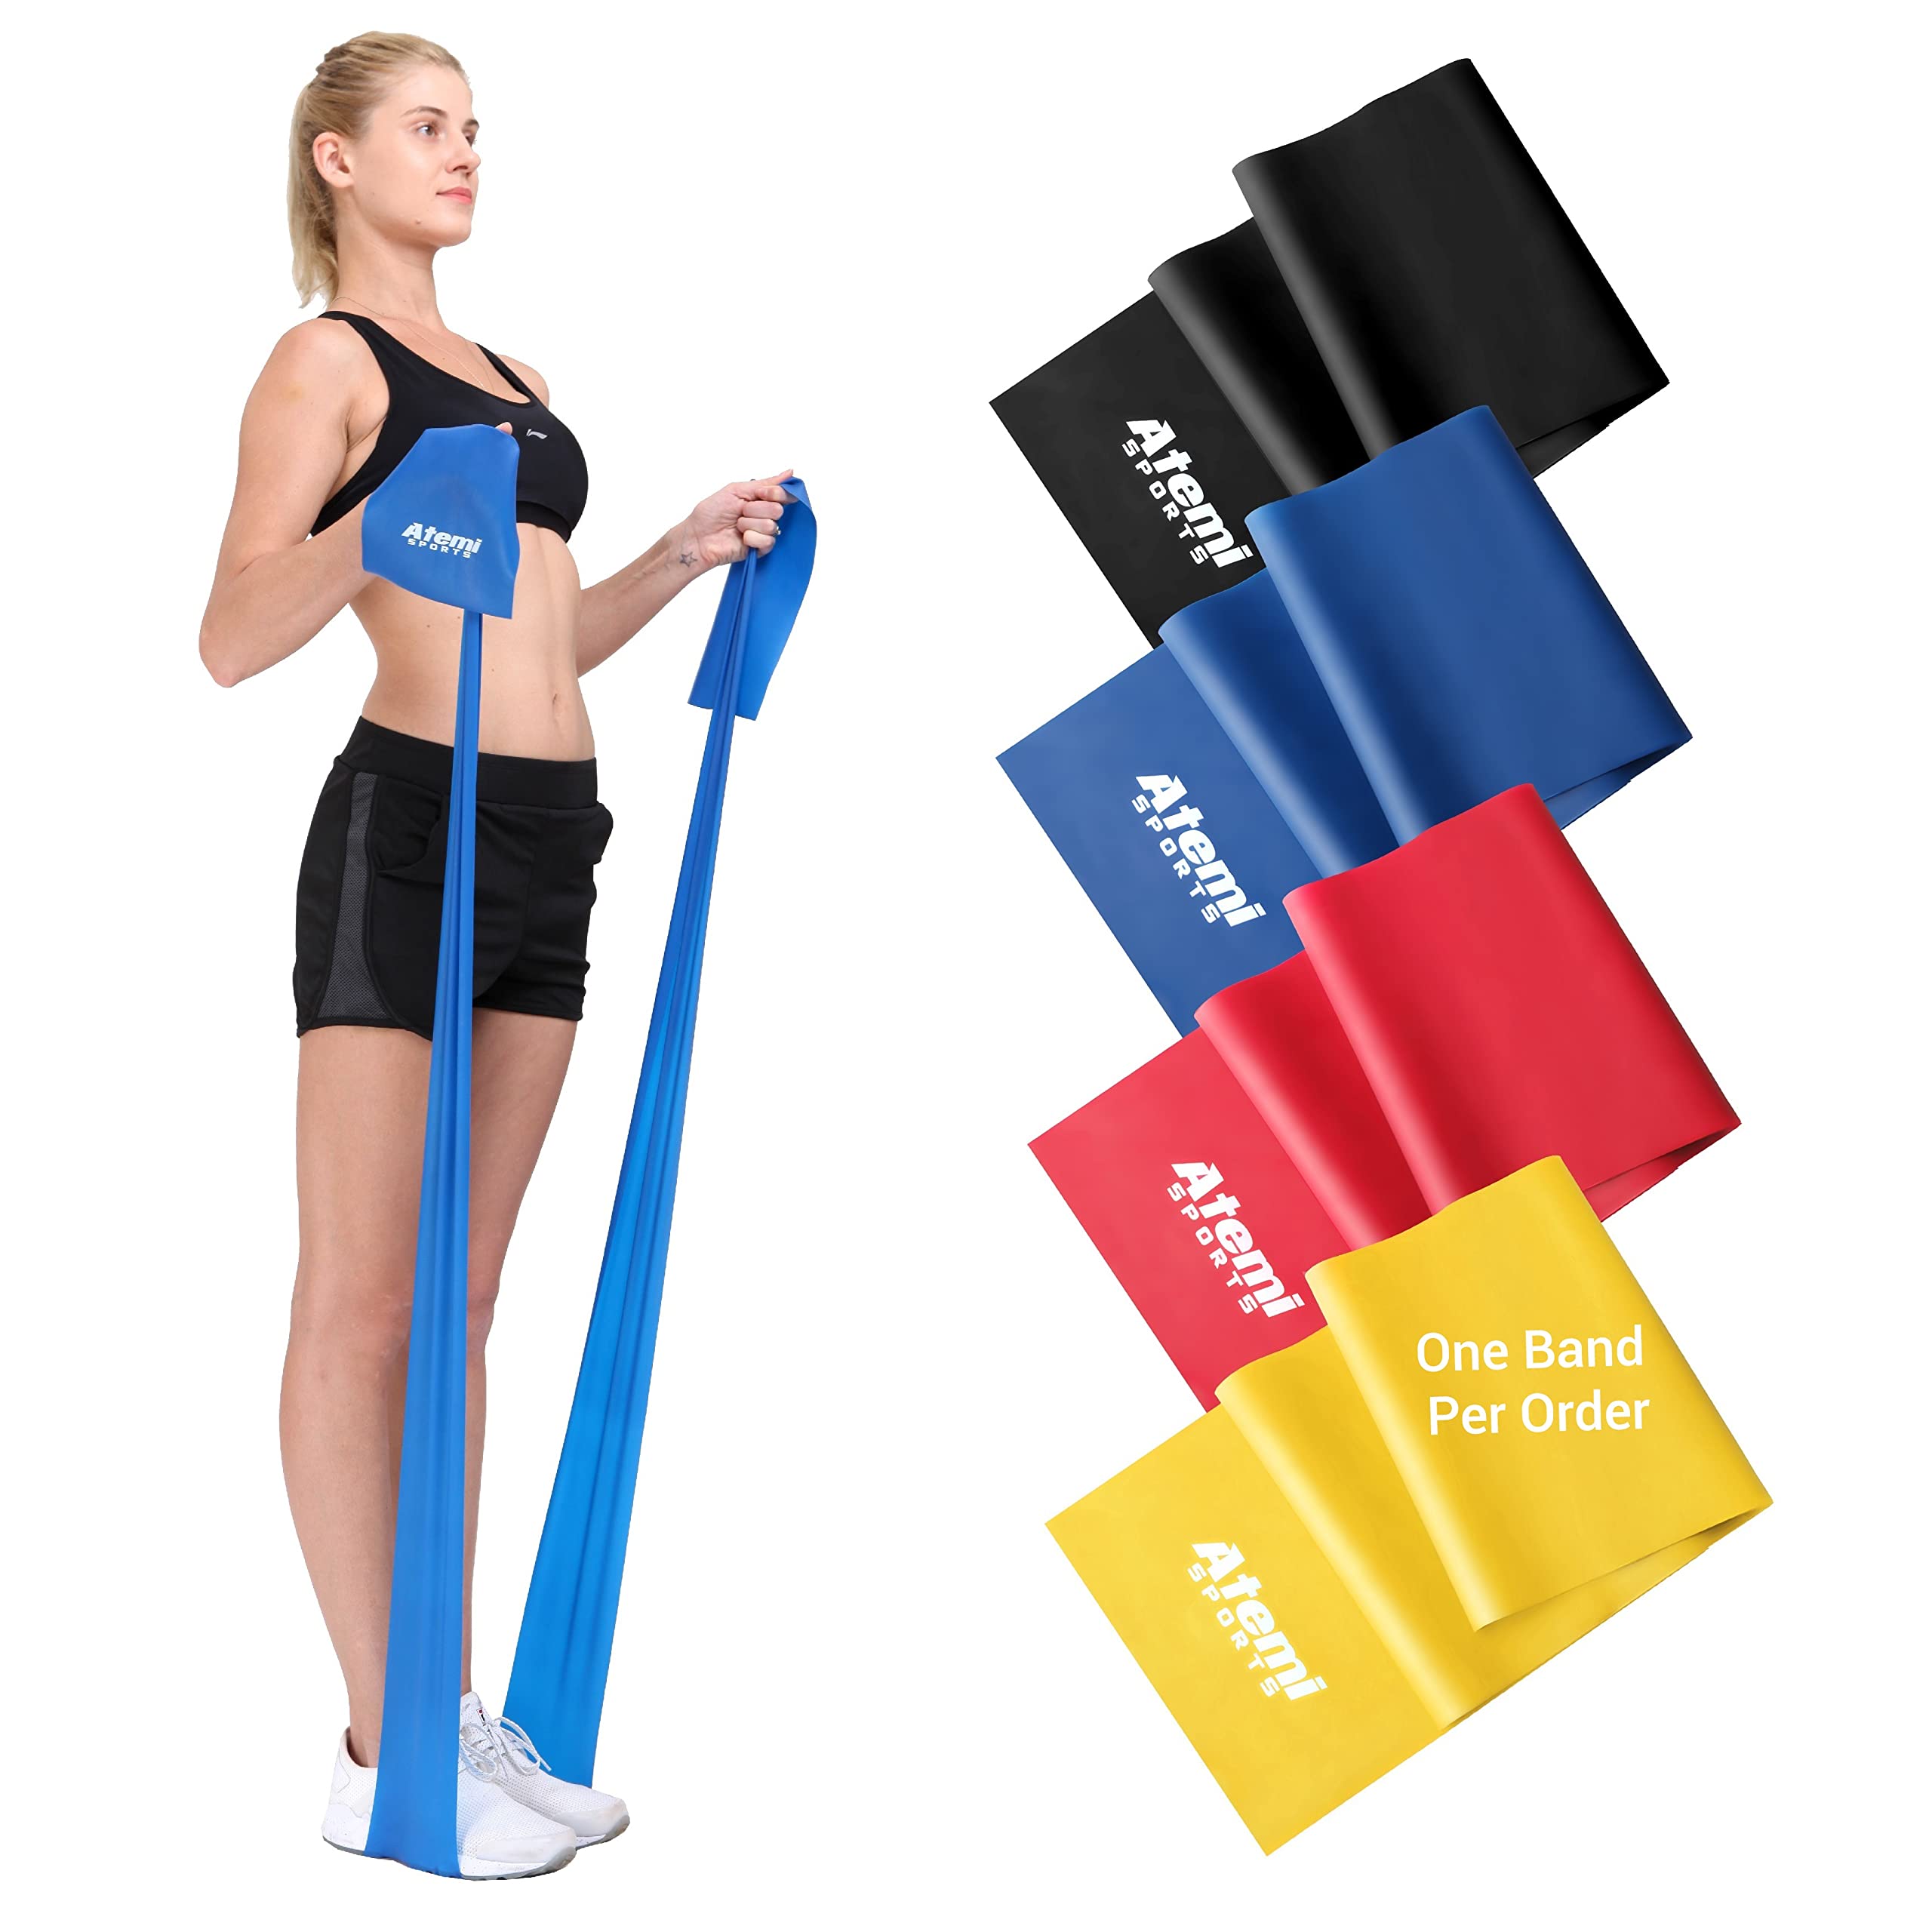 Exercise Bands for Physical Therapy (Sold Singly)